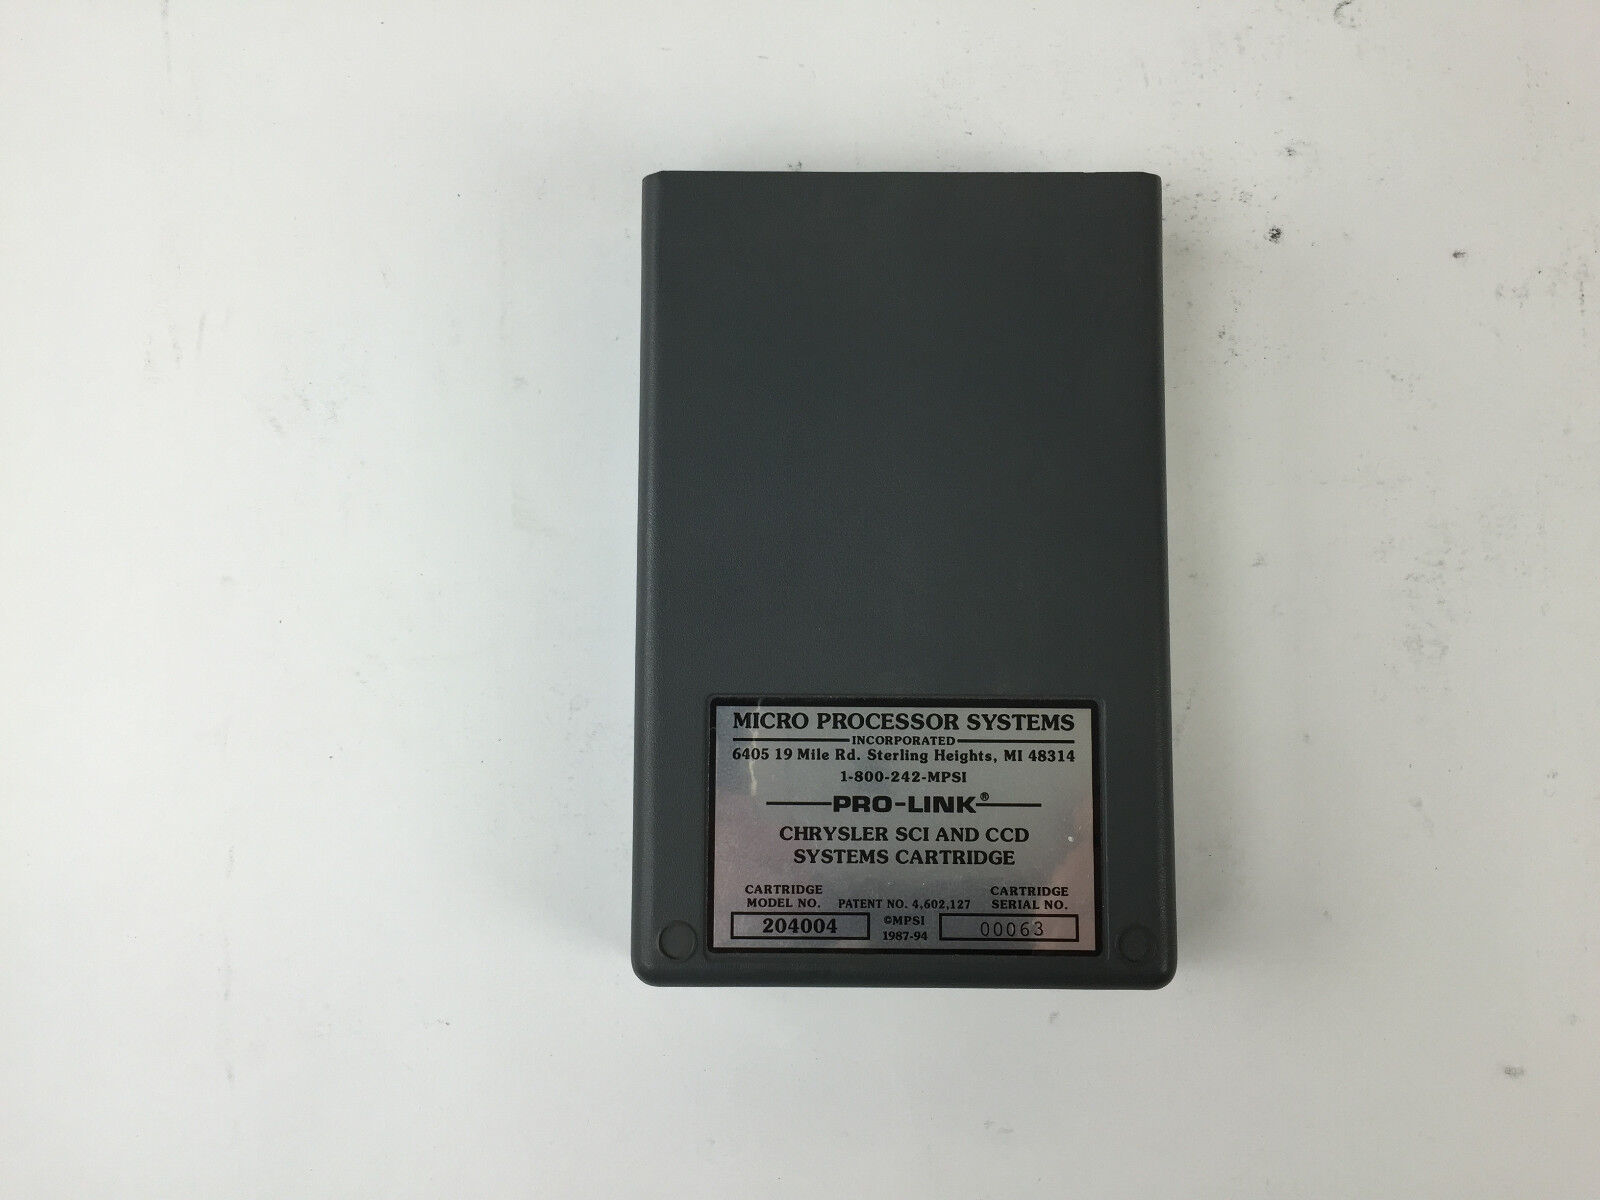 MPSI Chrysler SCI and CCD System Cartridge Model No. 204004